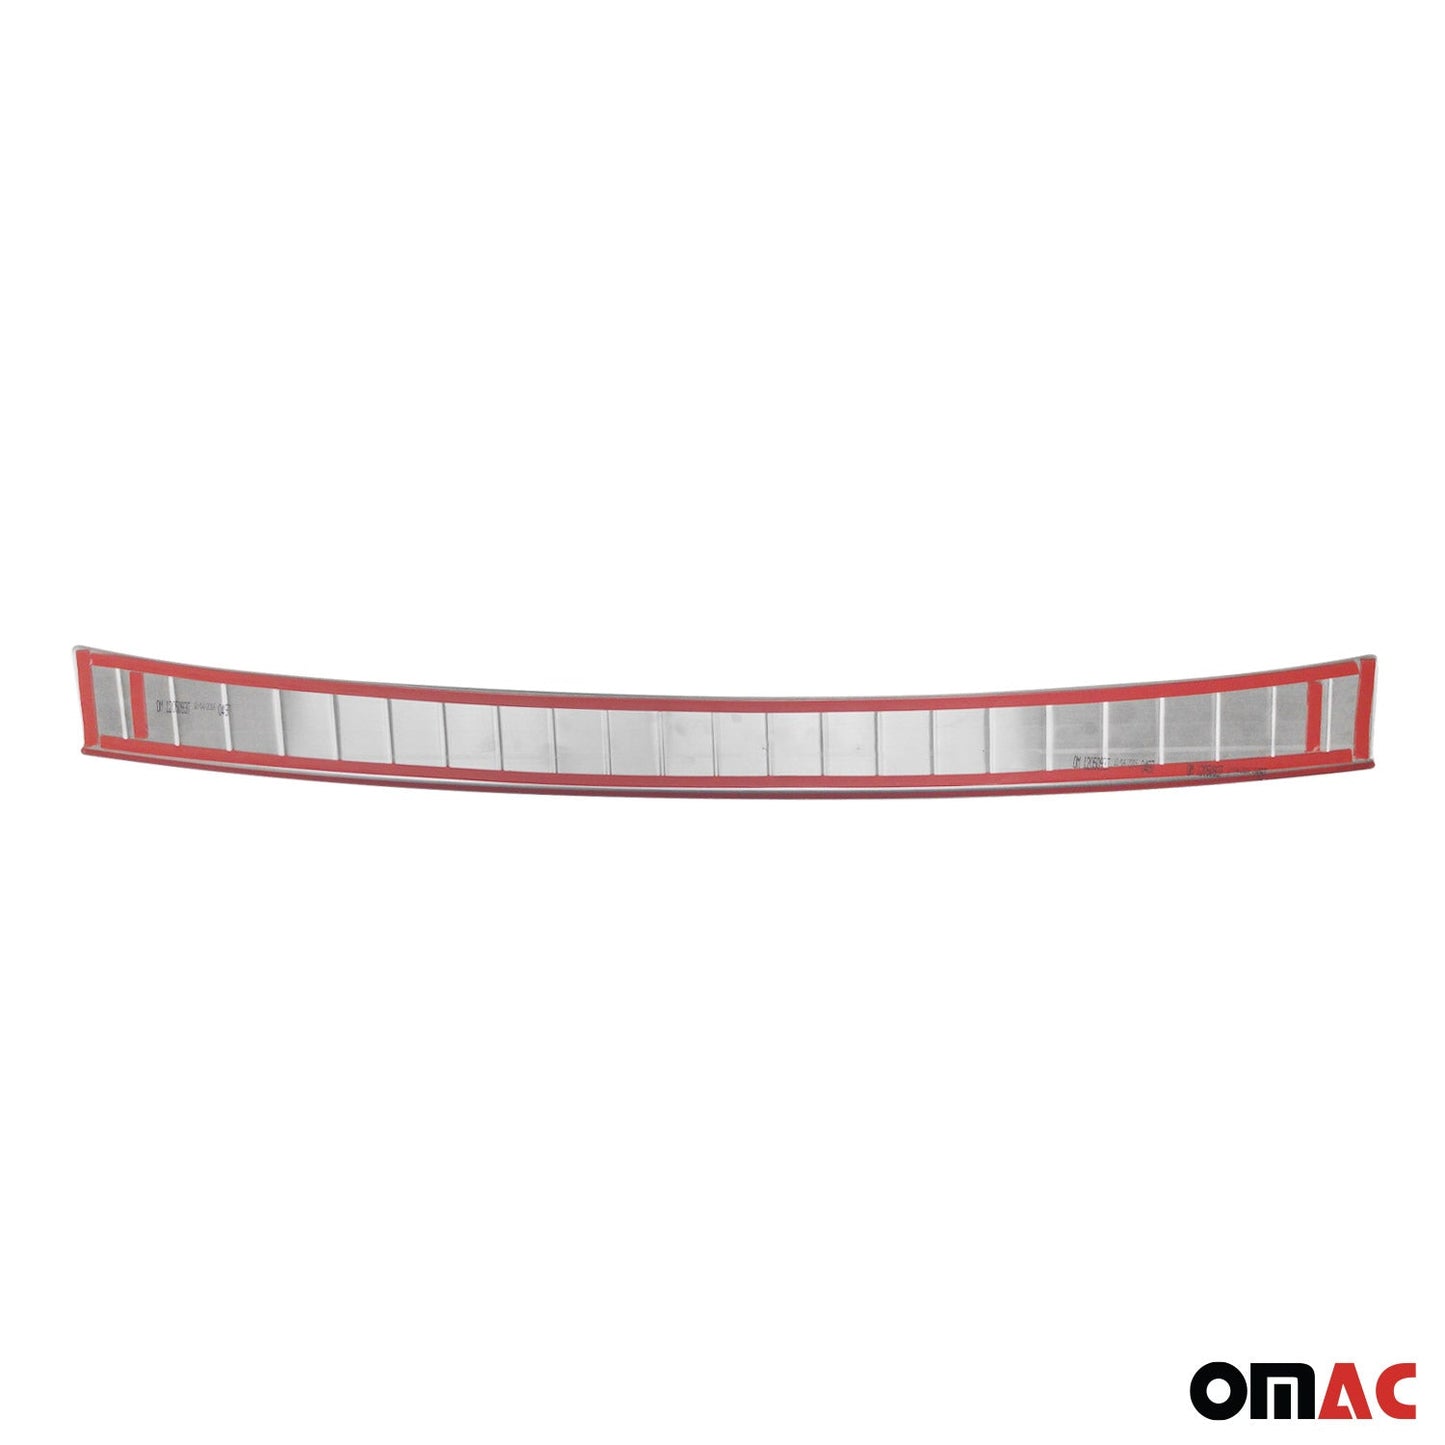 OMAC Fits BMW X1 E84 Facelift 2013-2015 Brushed Chrome Rear Bumper Guard Protector 1205093T